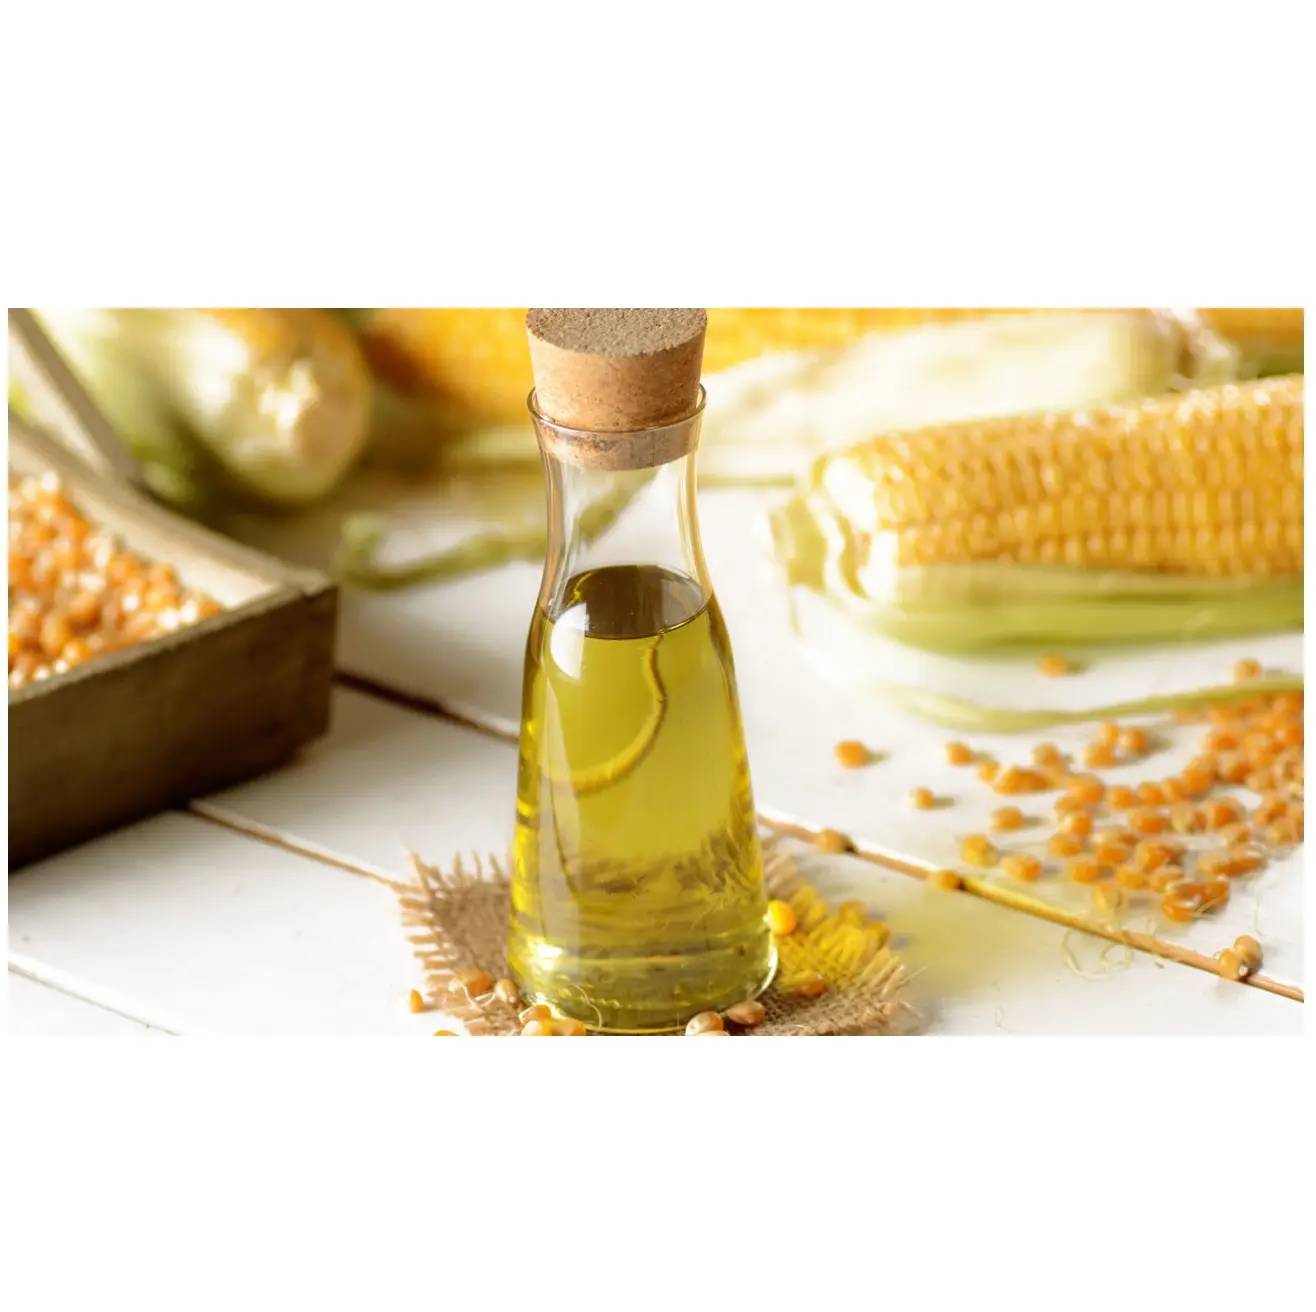 Available Bulk Stock Of Refined Corn Cooking Oil At Lowest Prices